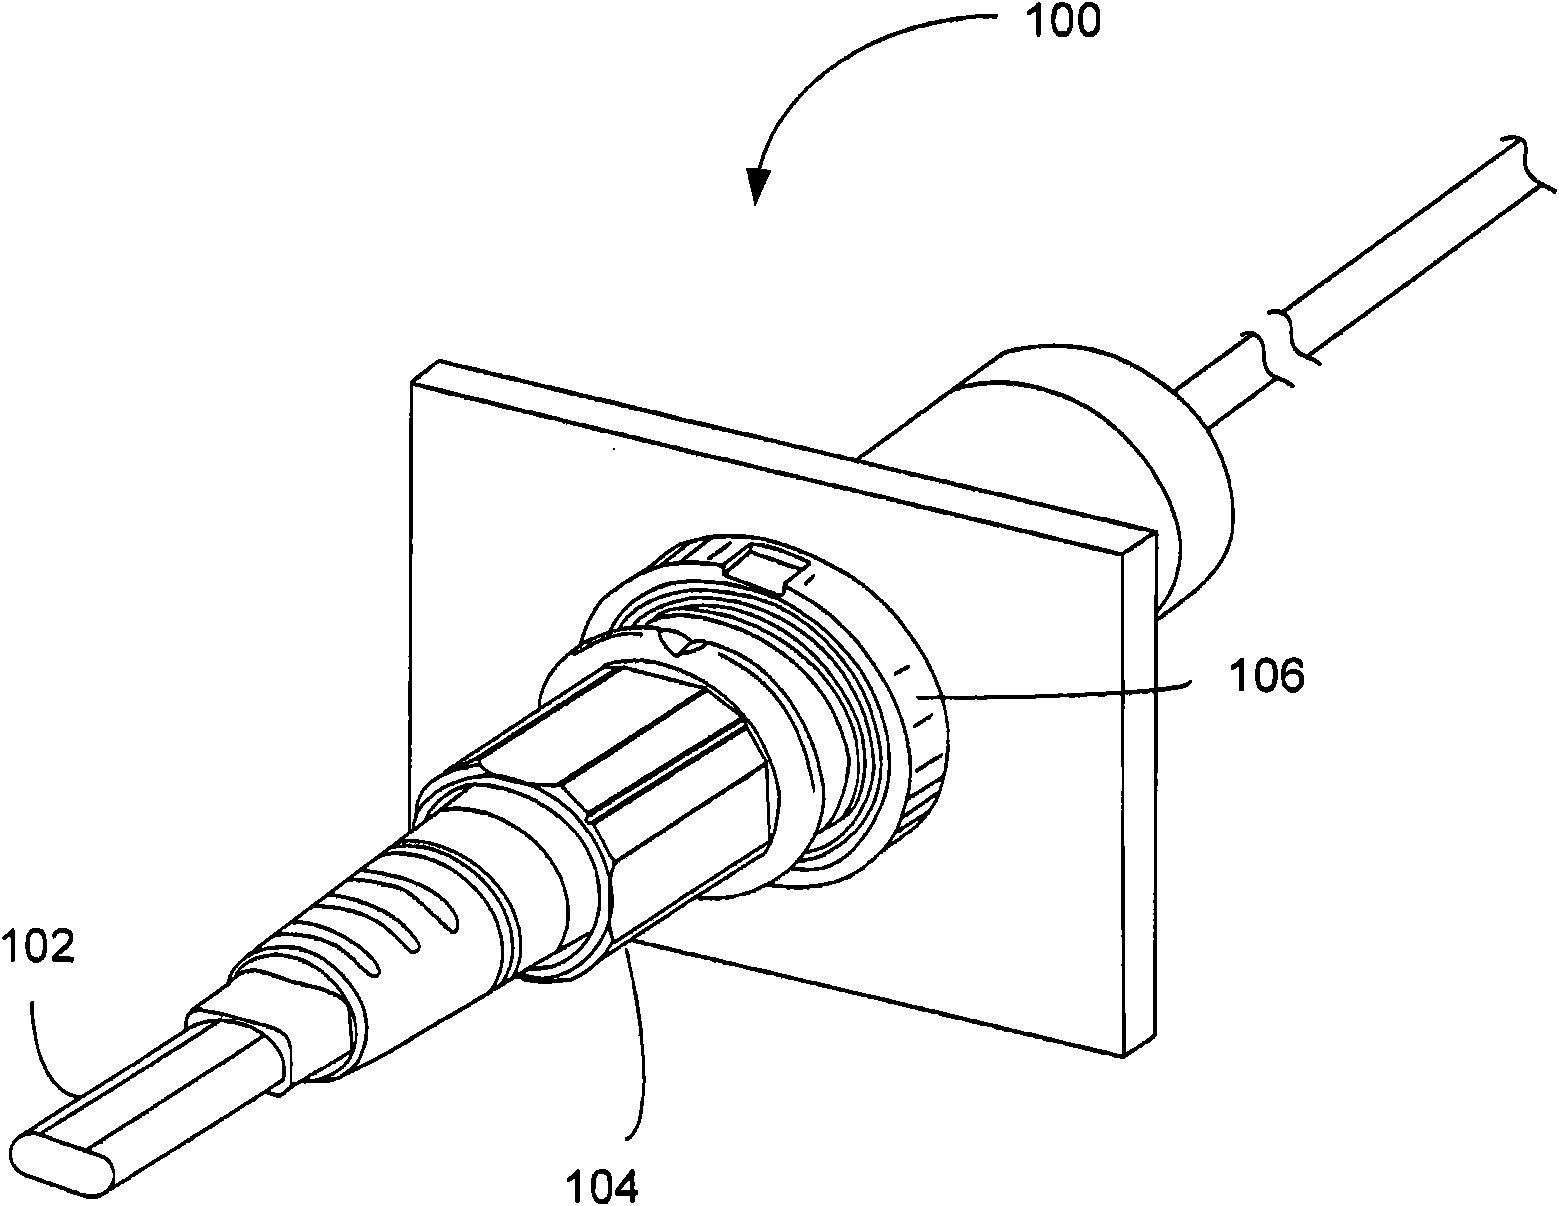 Single-piece cable retention housing for hardened outside plant connector